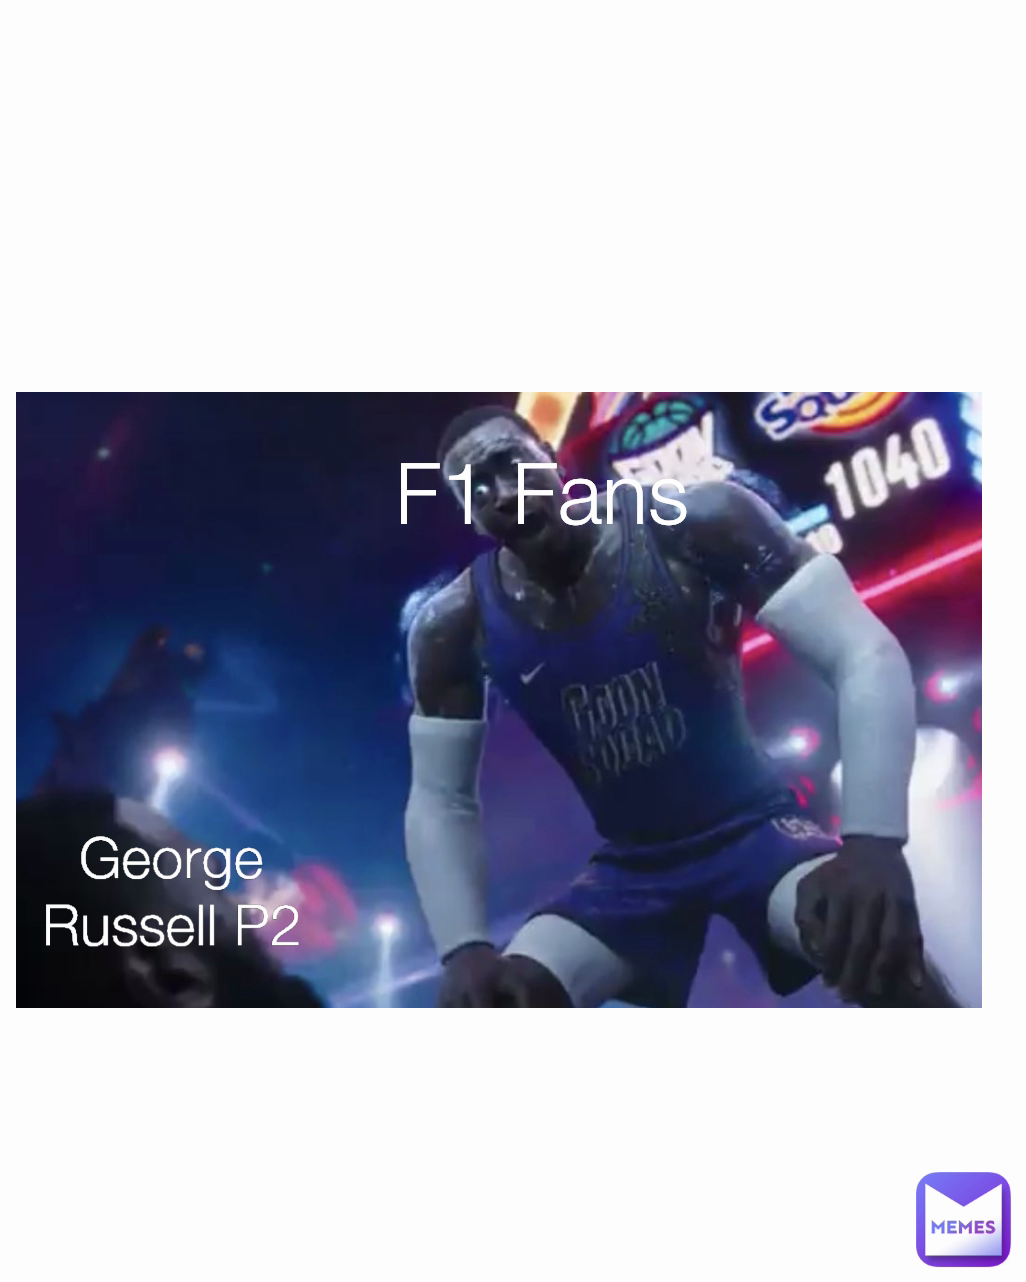 F1 Fans George Russell P2

